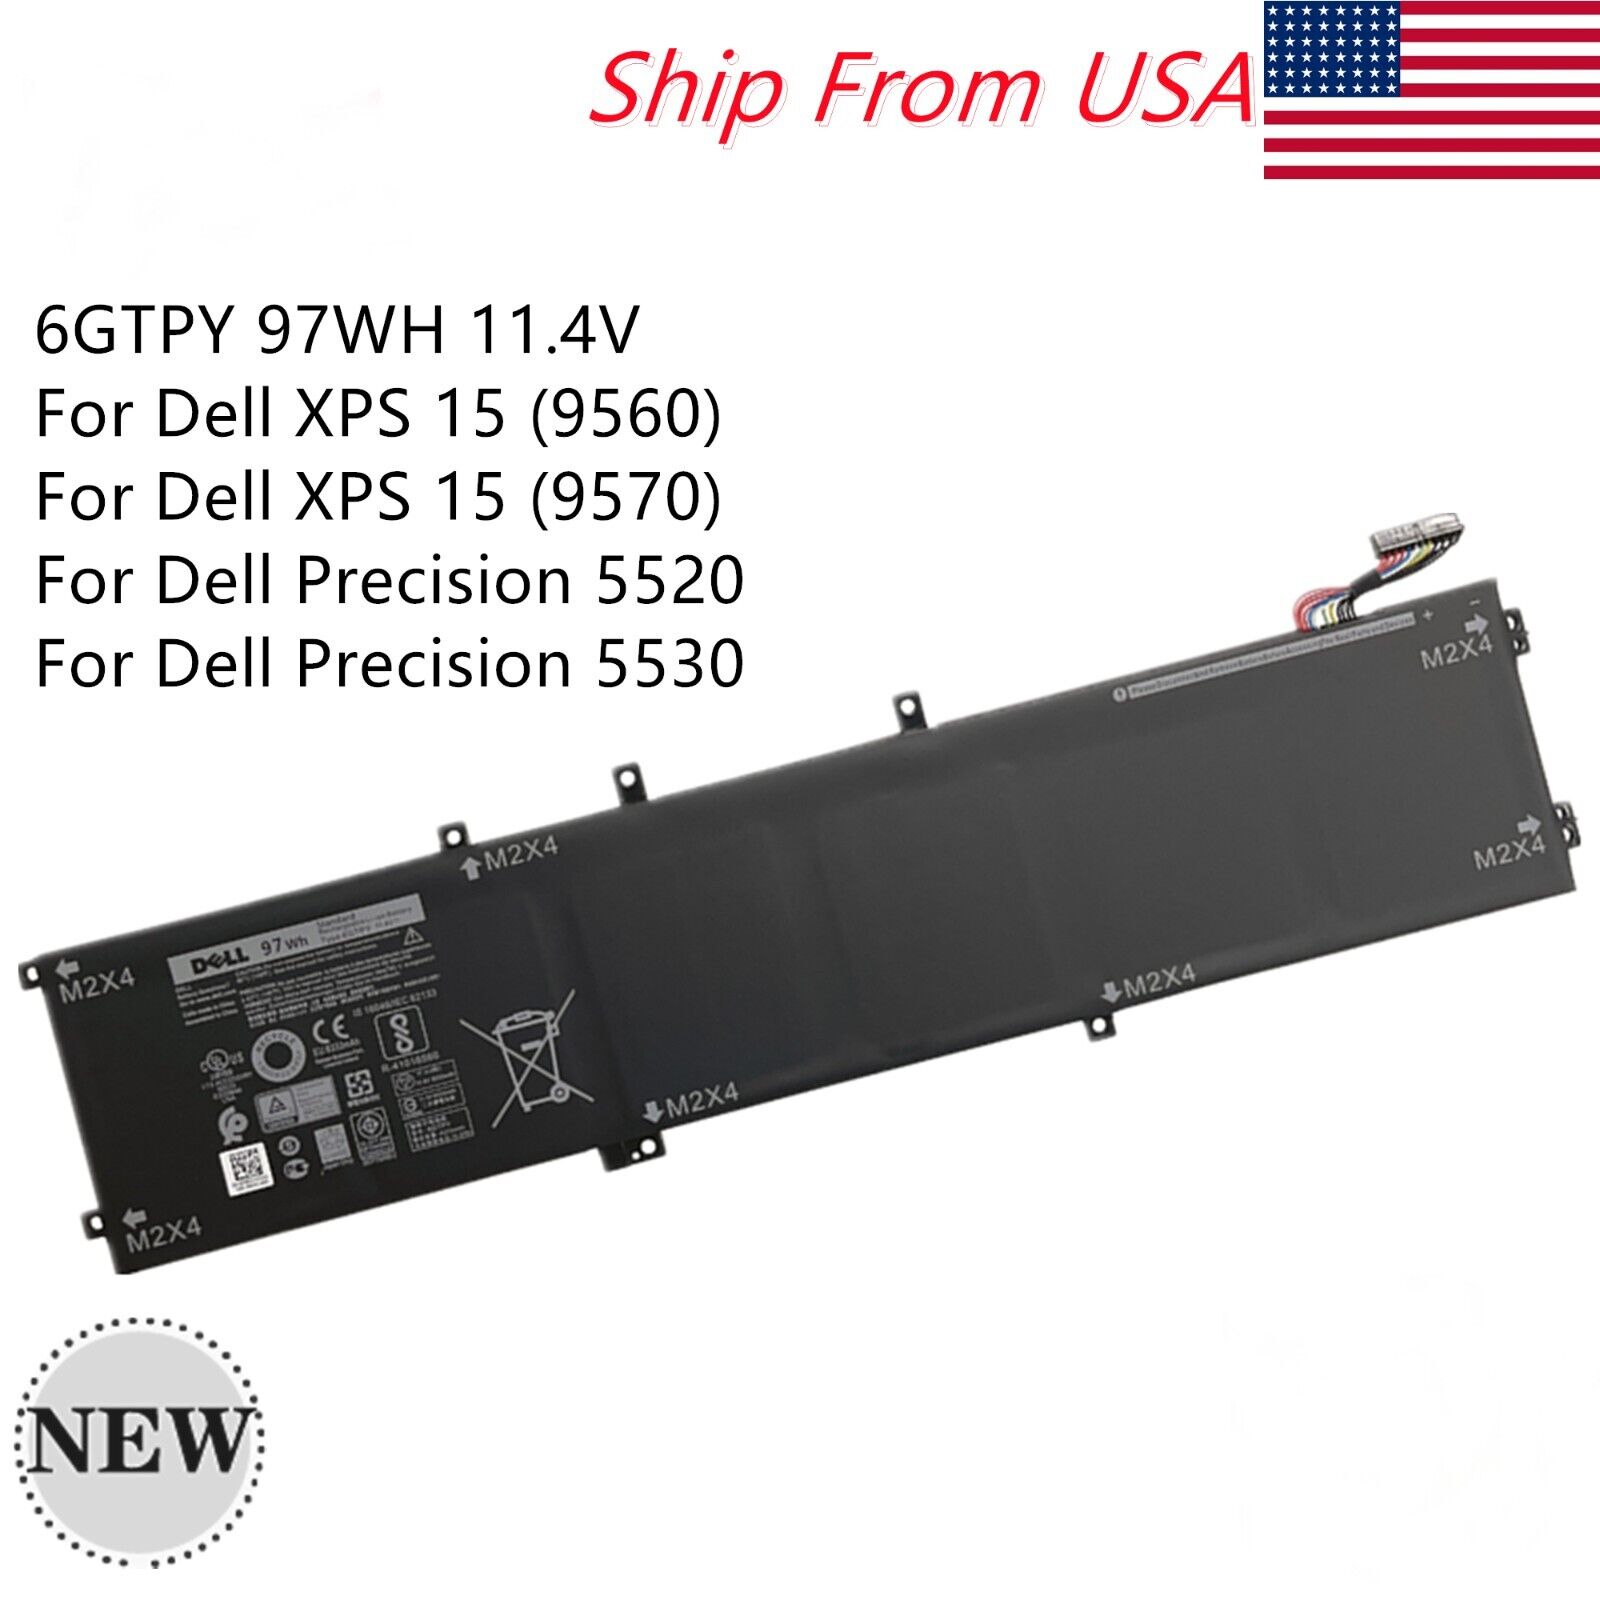 OEM 97Wh 6GTPY Battery For Dell Precision 5520 5530 XPS 15 9560 9570 GPM03 5XJ28